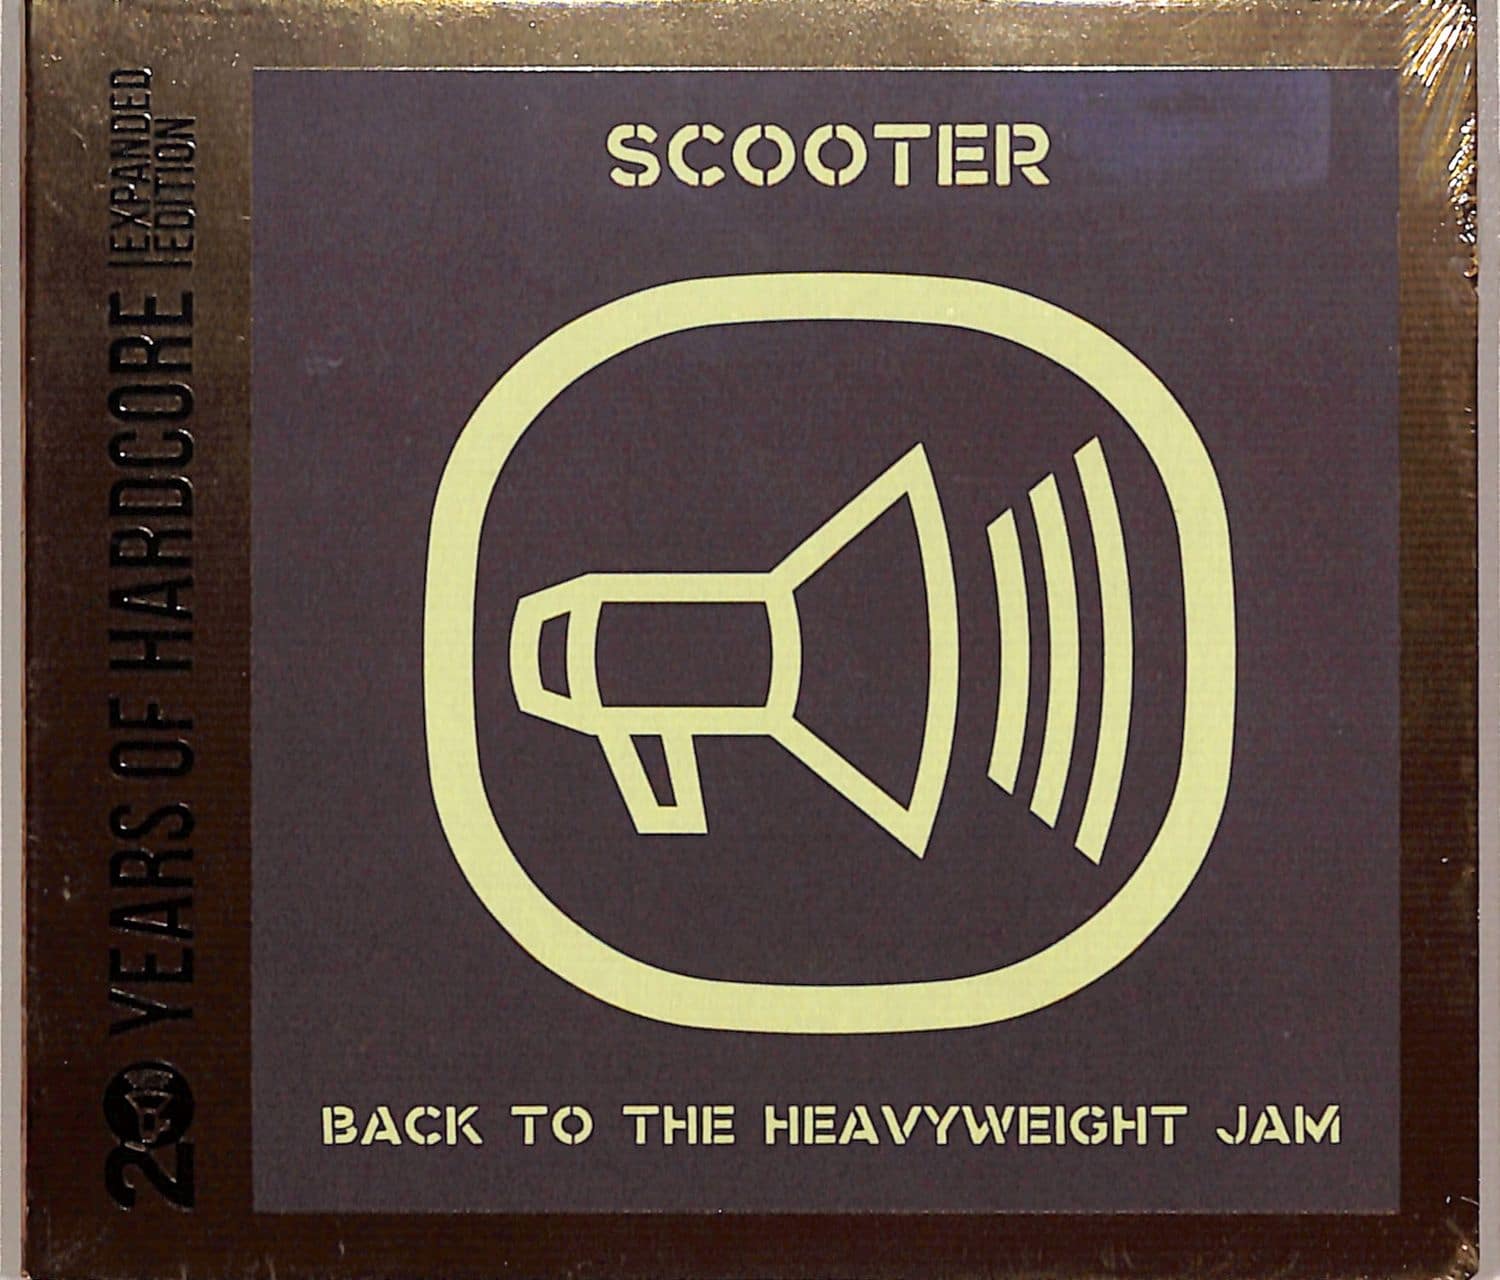 Scooter - 20 YEARS OF HARDCORE-BACK TO THE HEAVYWEIGHT JAM 